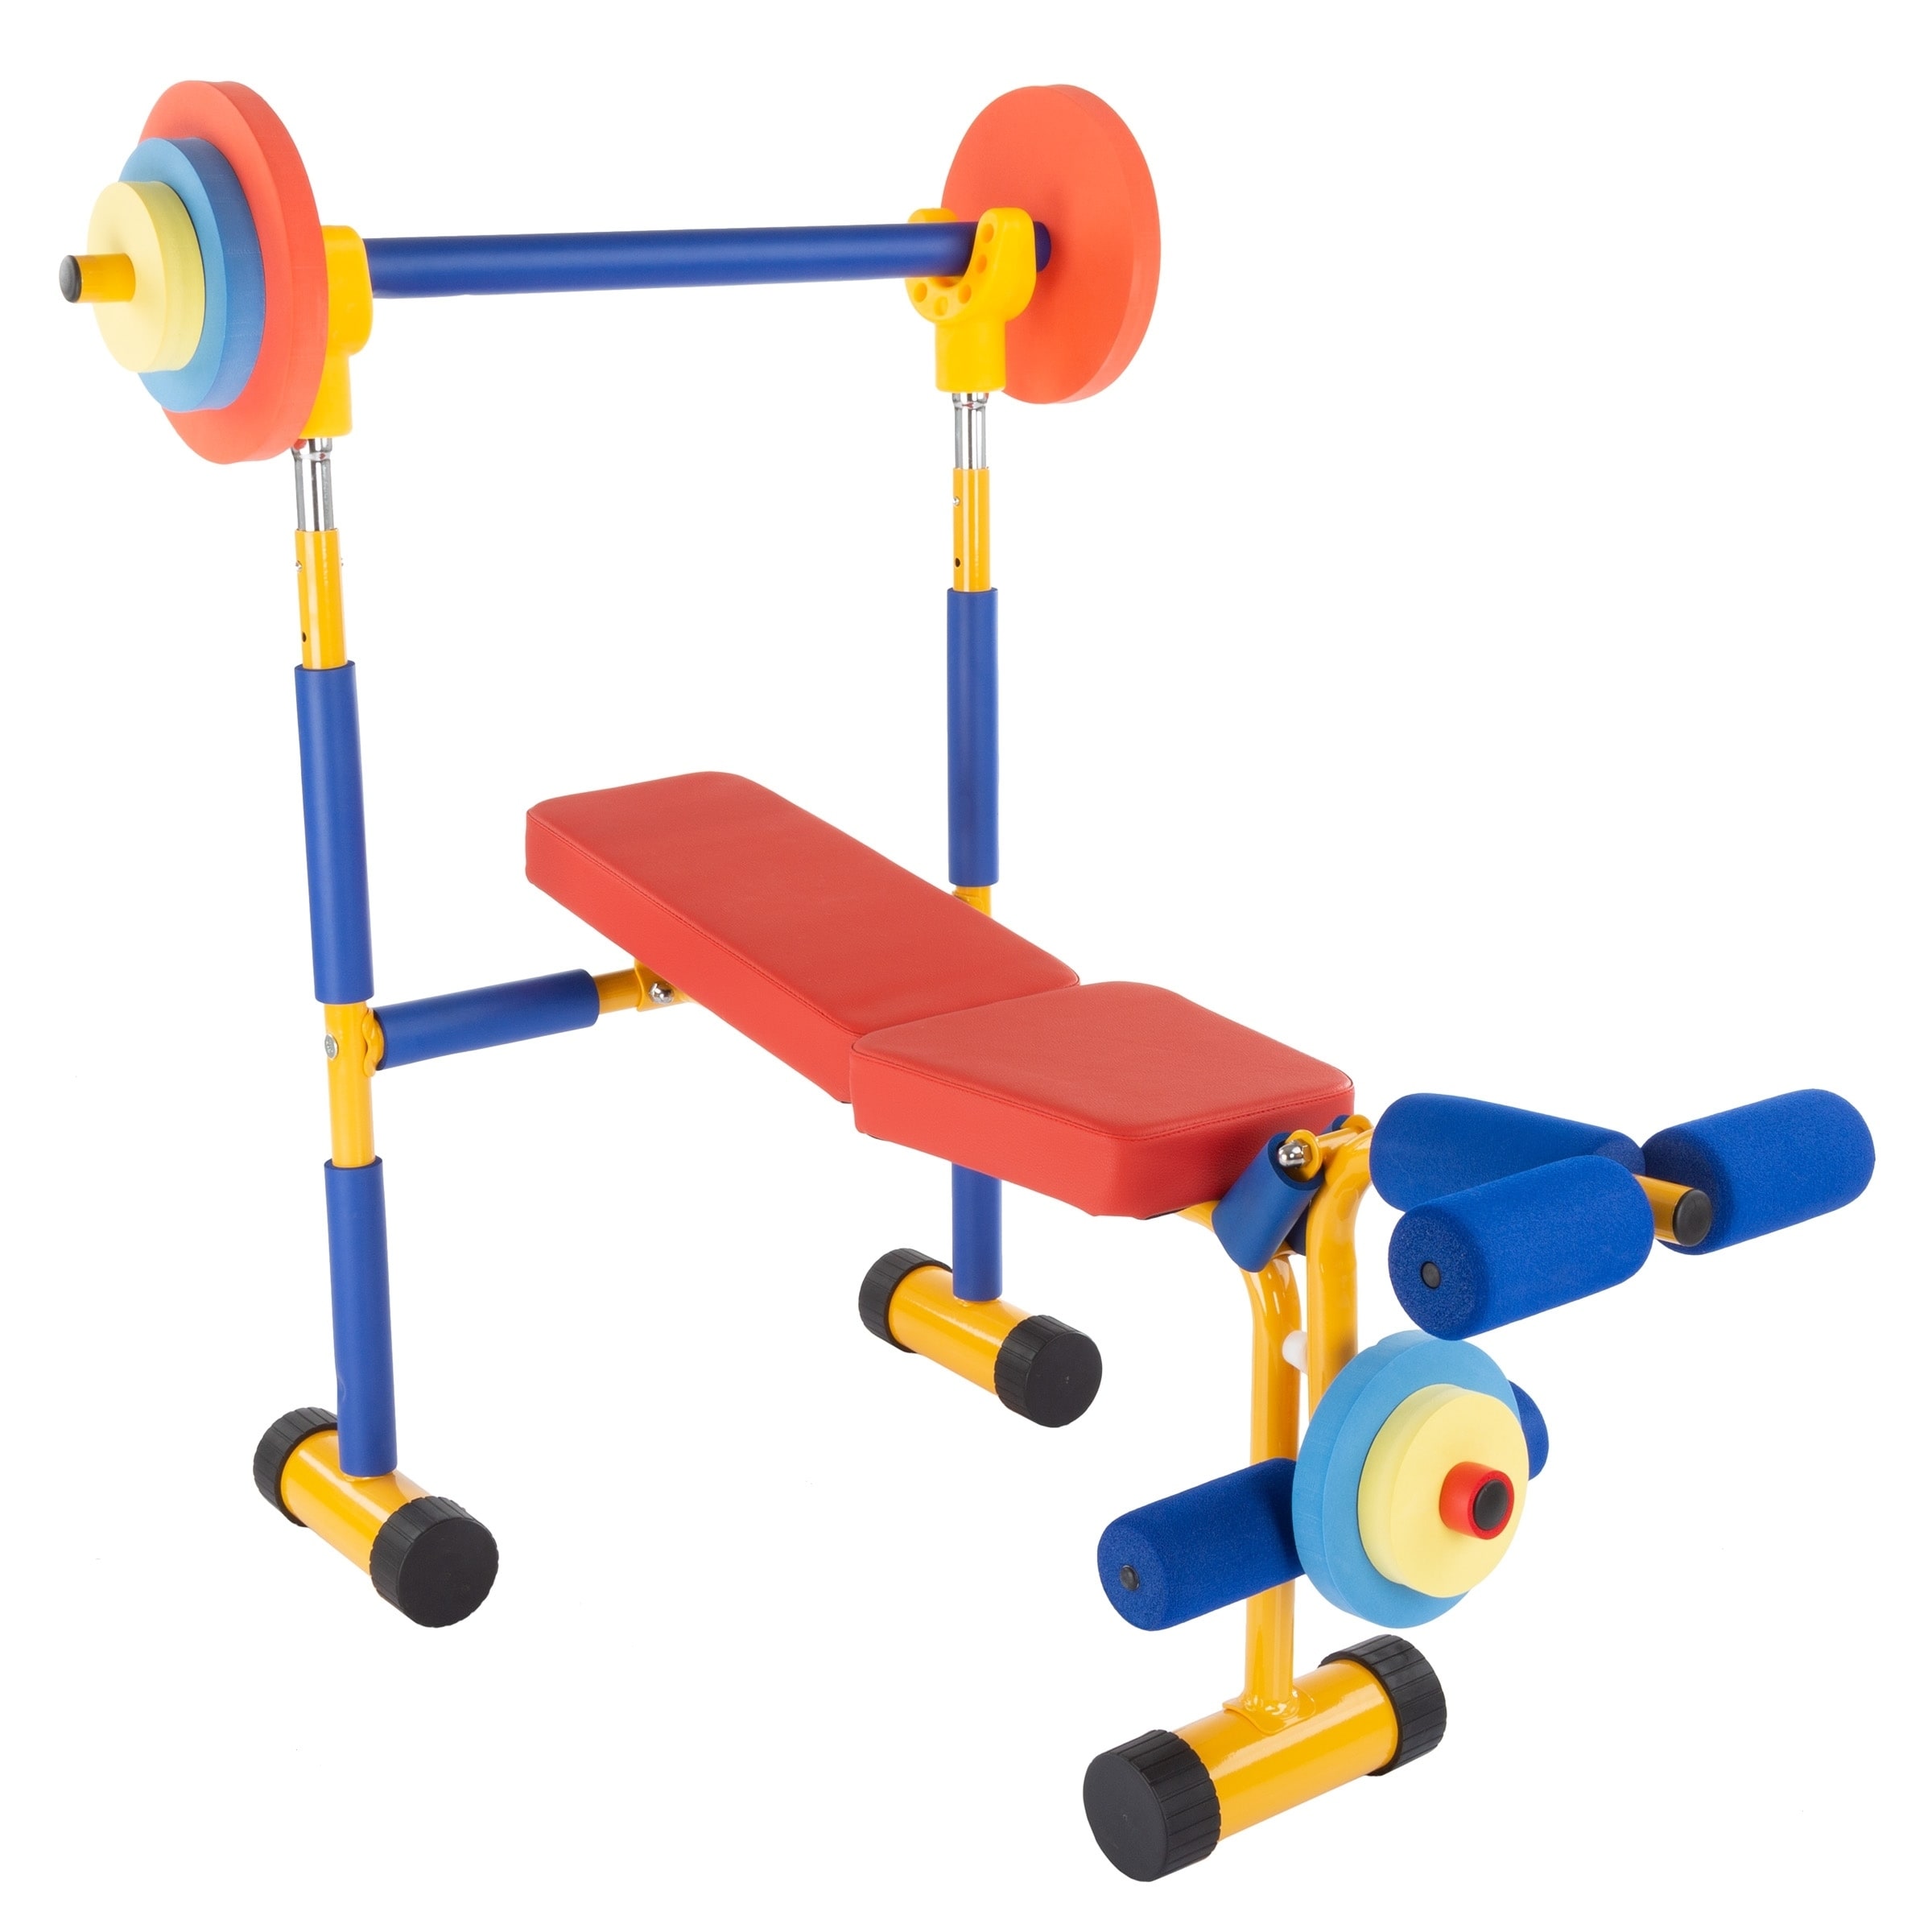 Toy Bench and Leg Press Childrens Play Workout Equ...